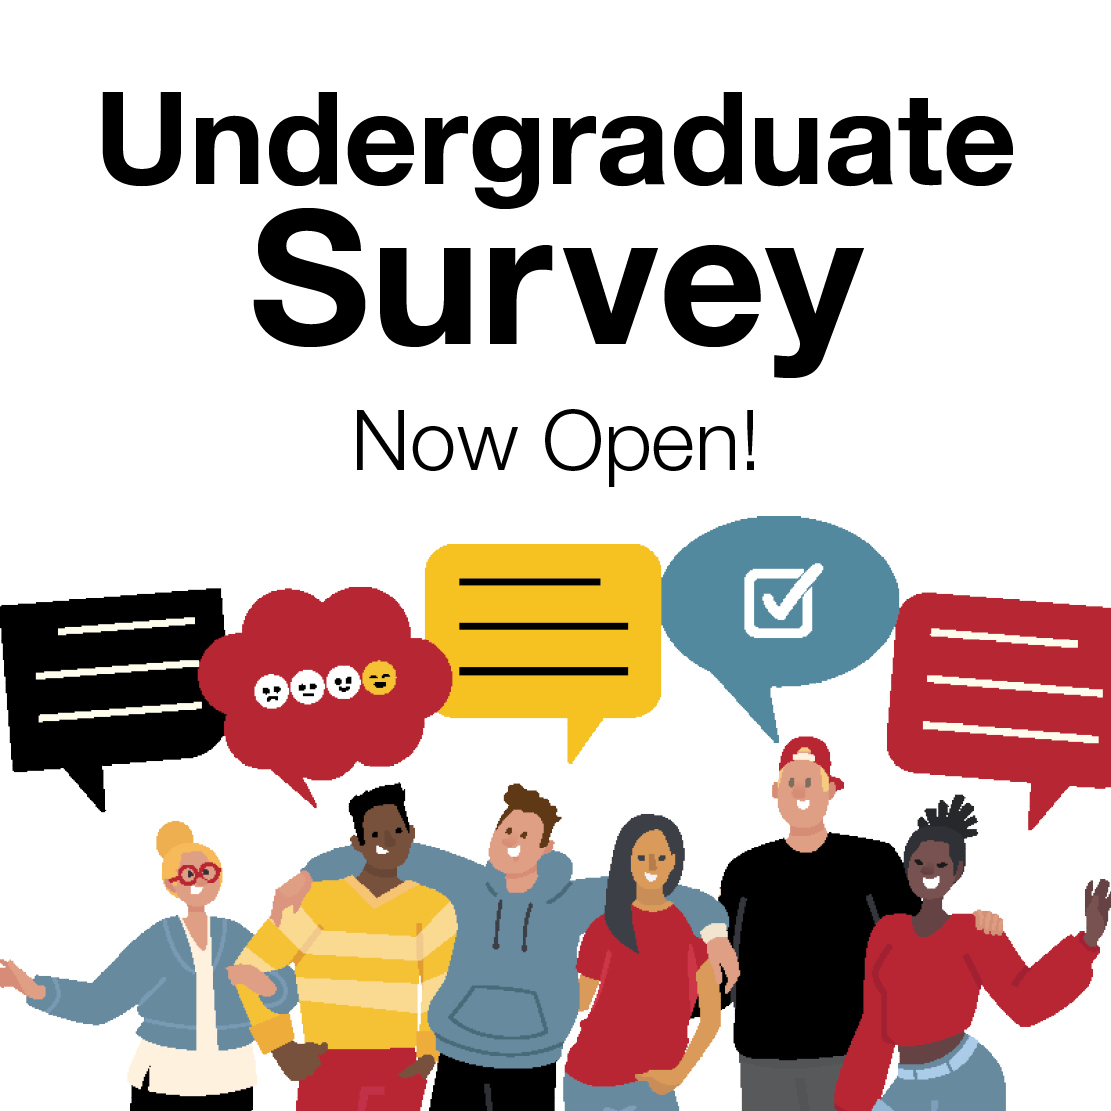 The text on this graphic reads "Undergraduate Survey Now Open!" Below the text are cartoon drawings of students with speech bubbles above their heads.